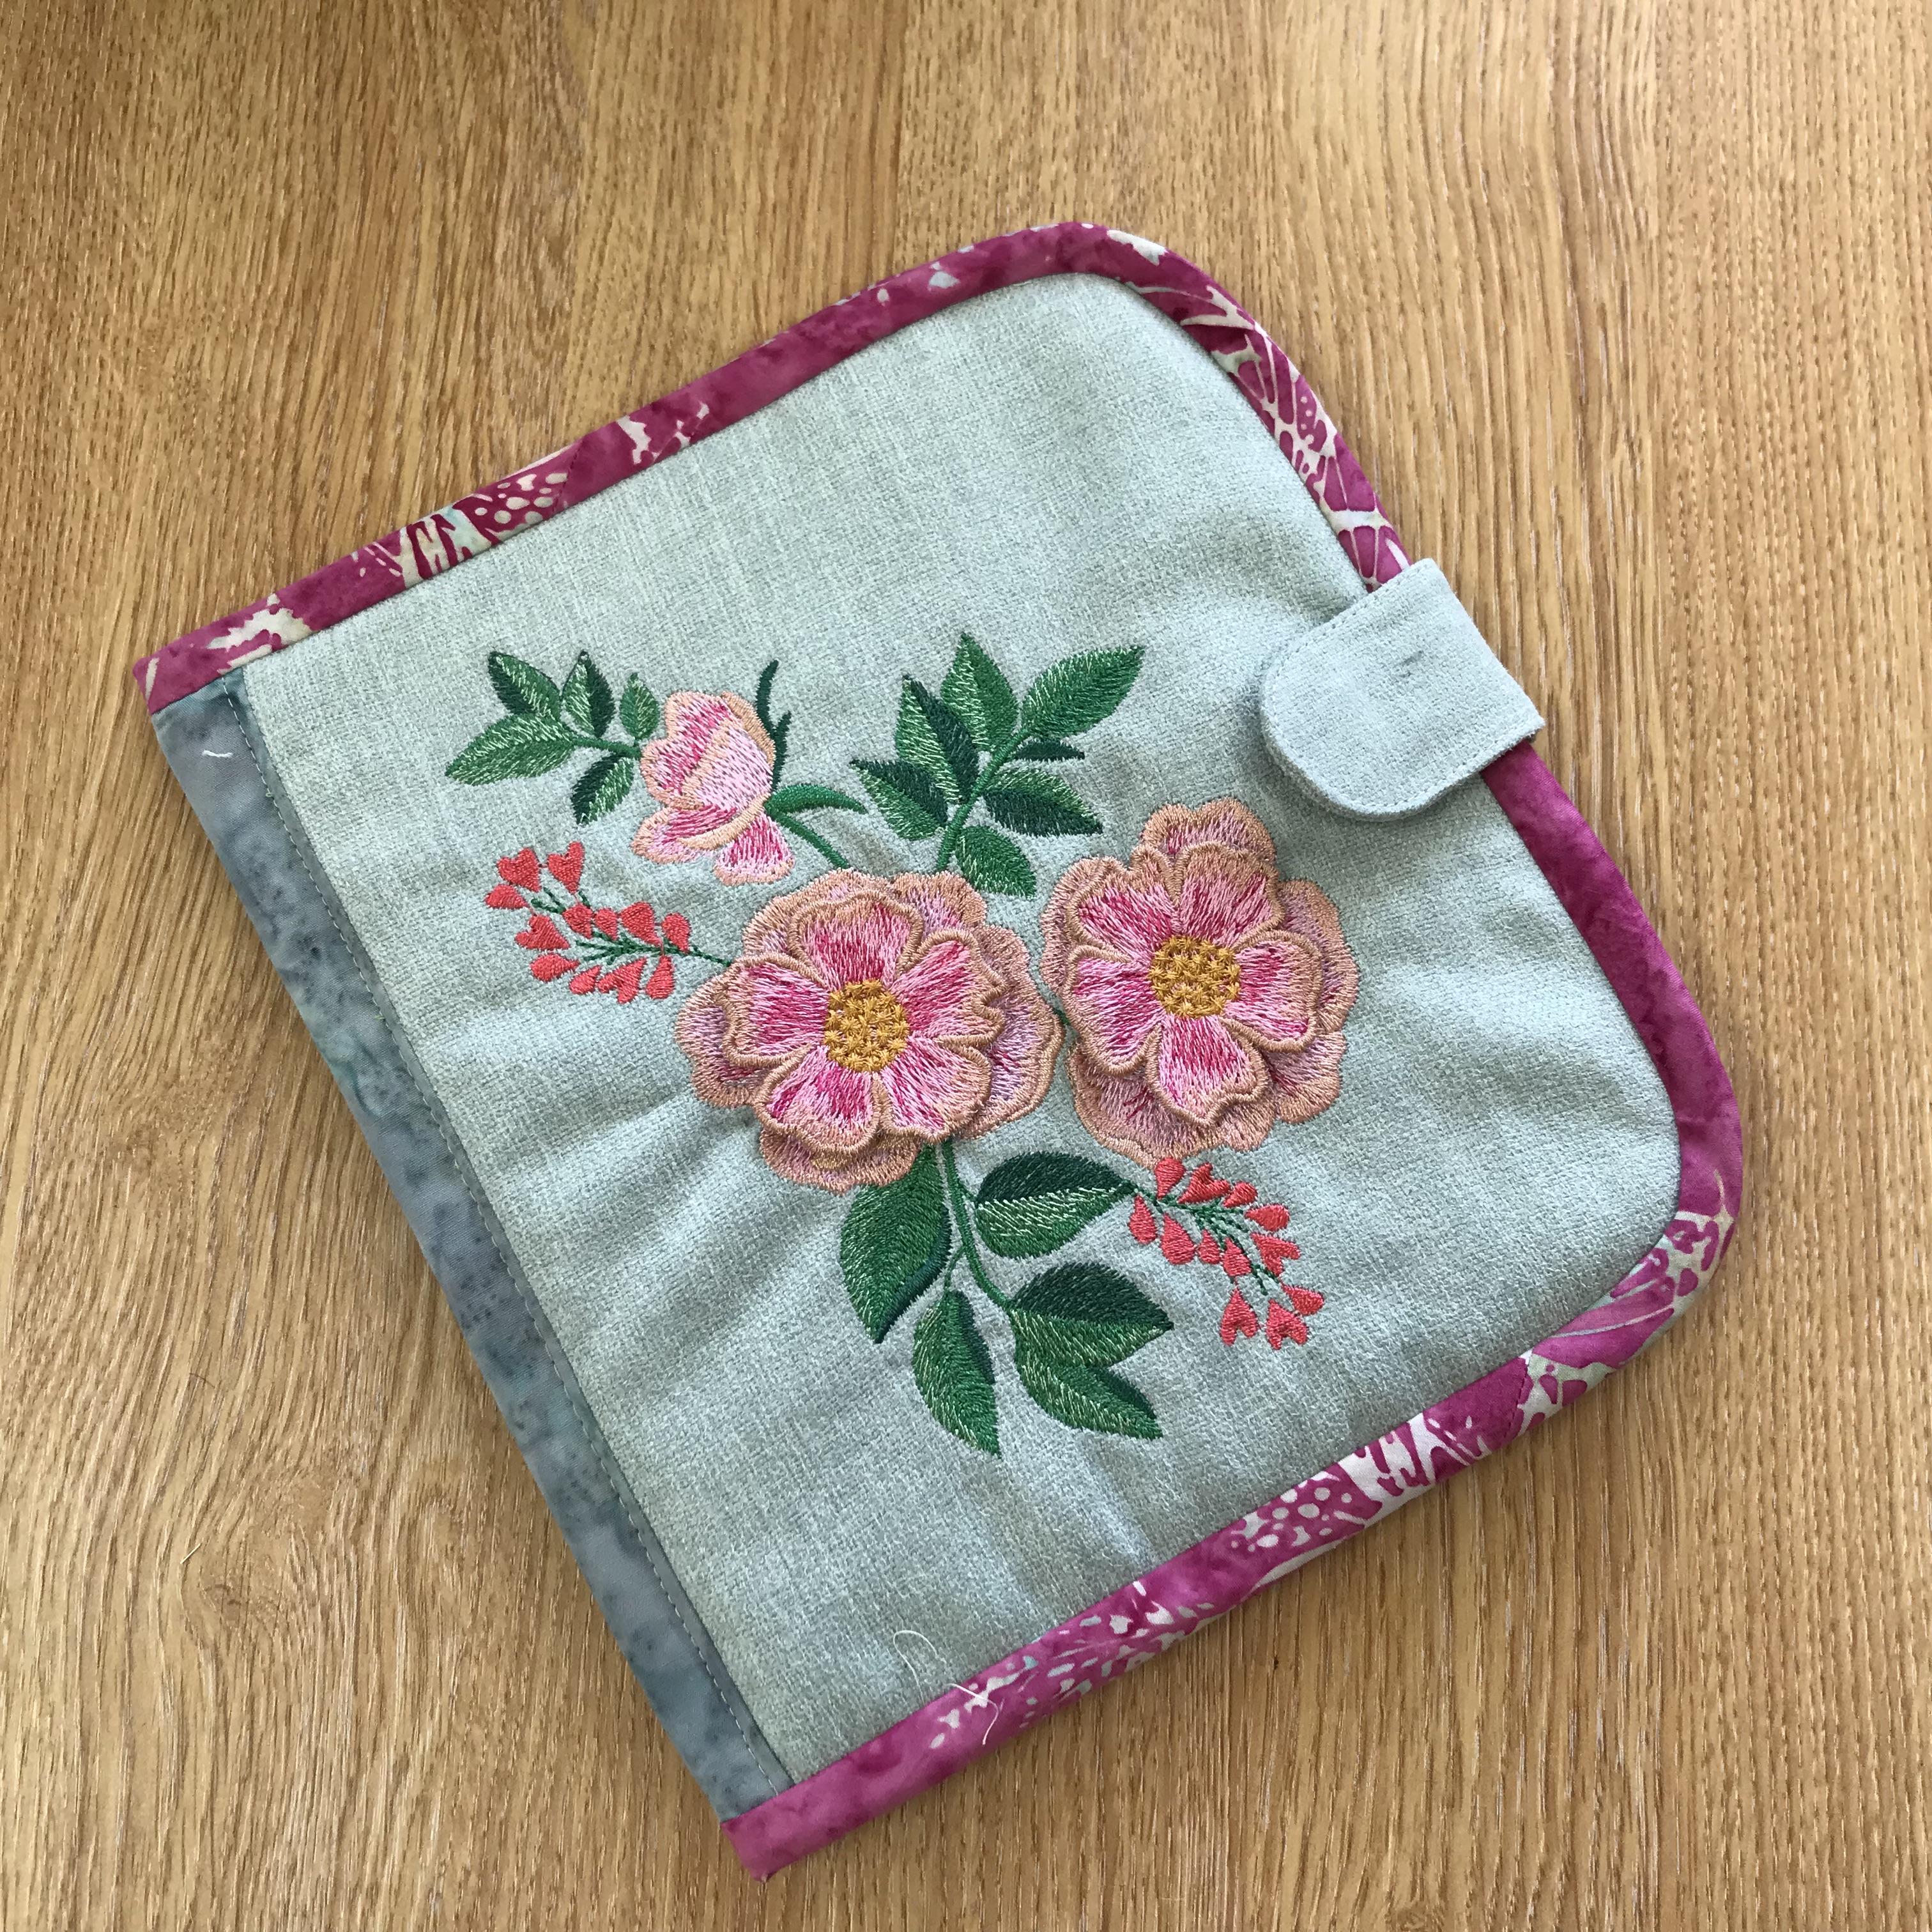 Embroidered Needle Case